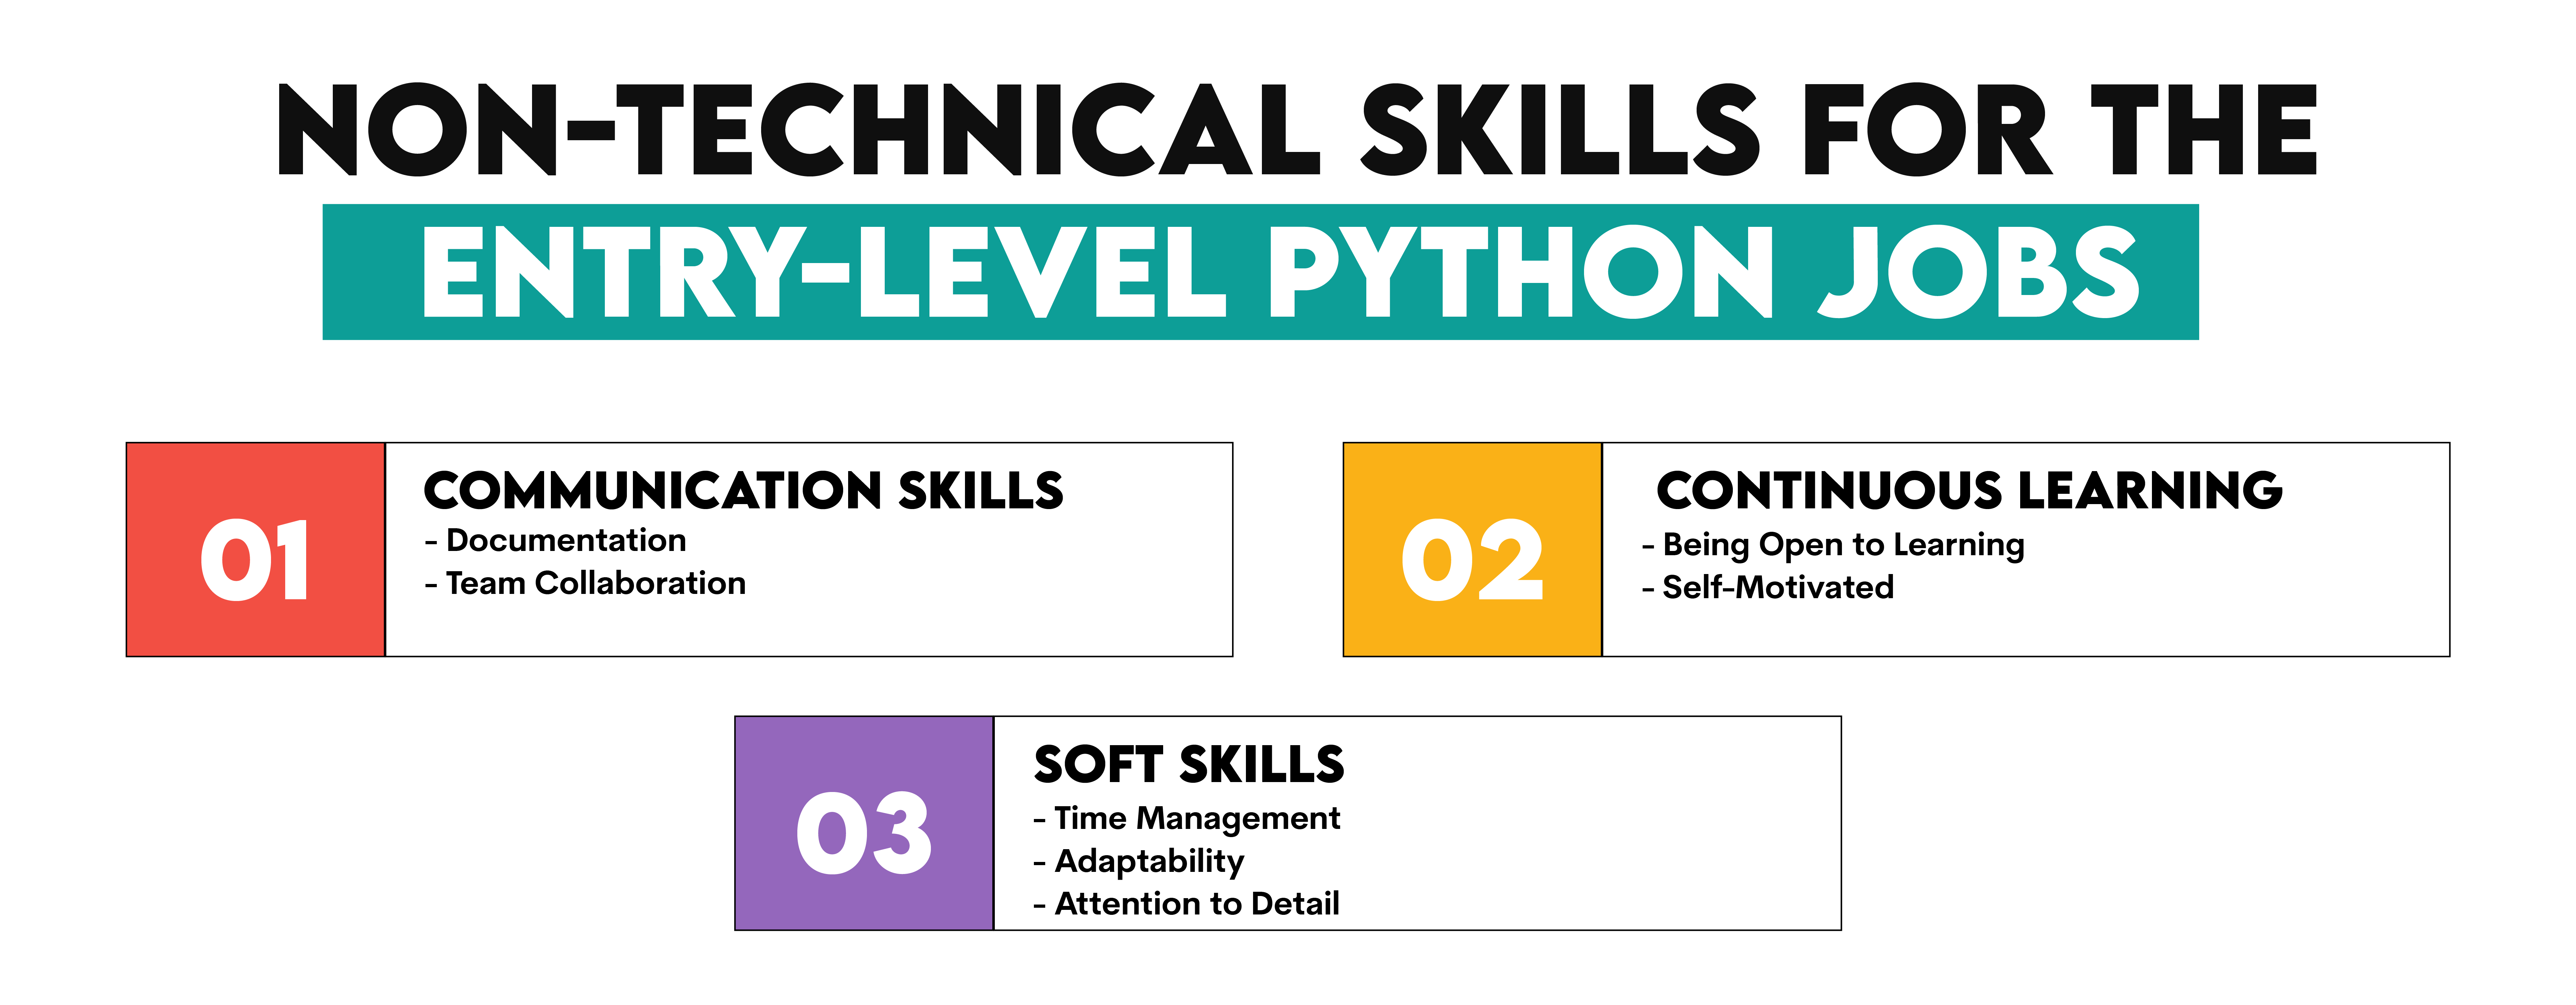 Non Technical Skills for Entry Level Python Jobs